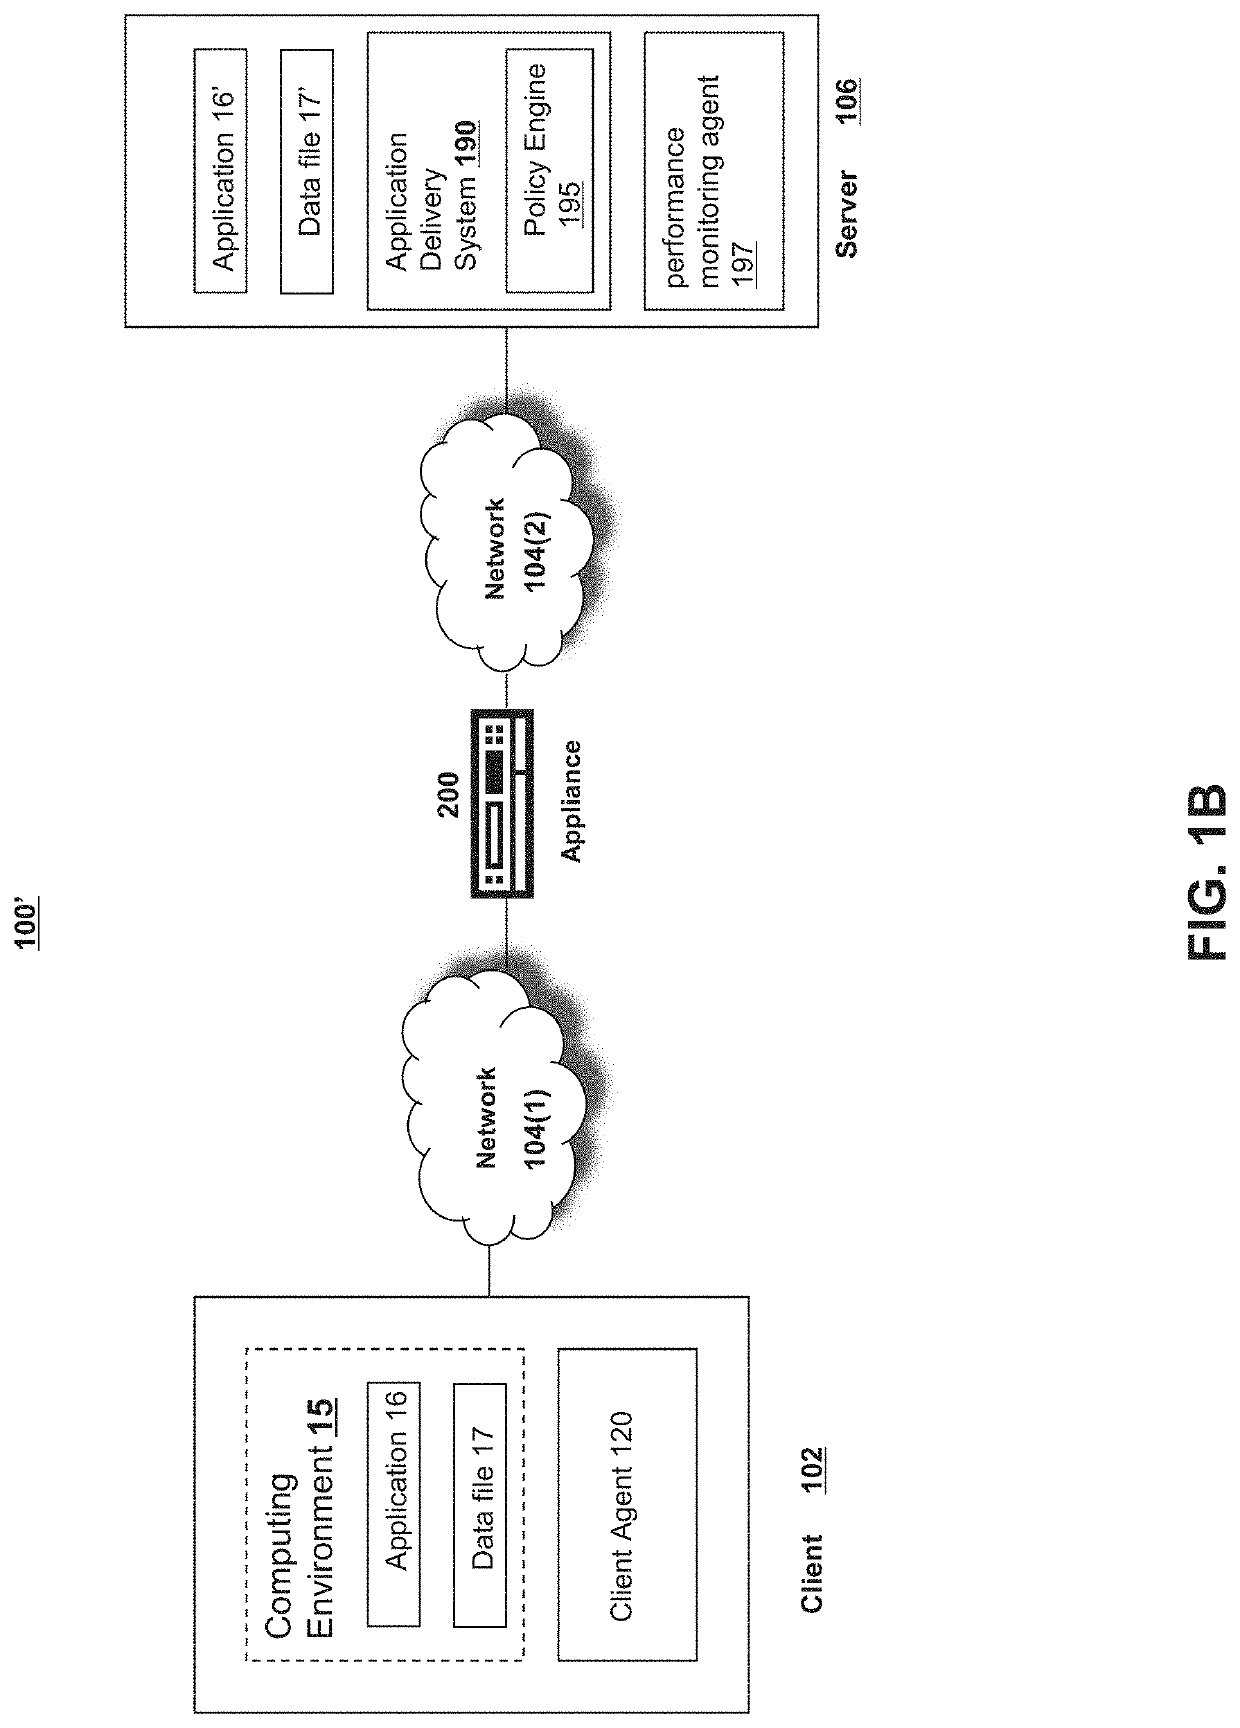 Systems and methods to operate devices with domain name system (DNS) caches